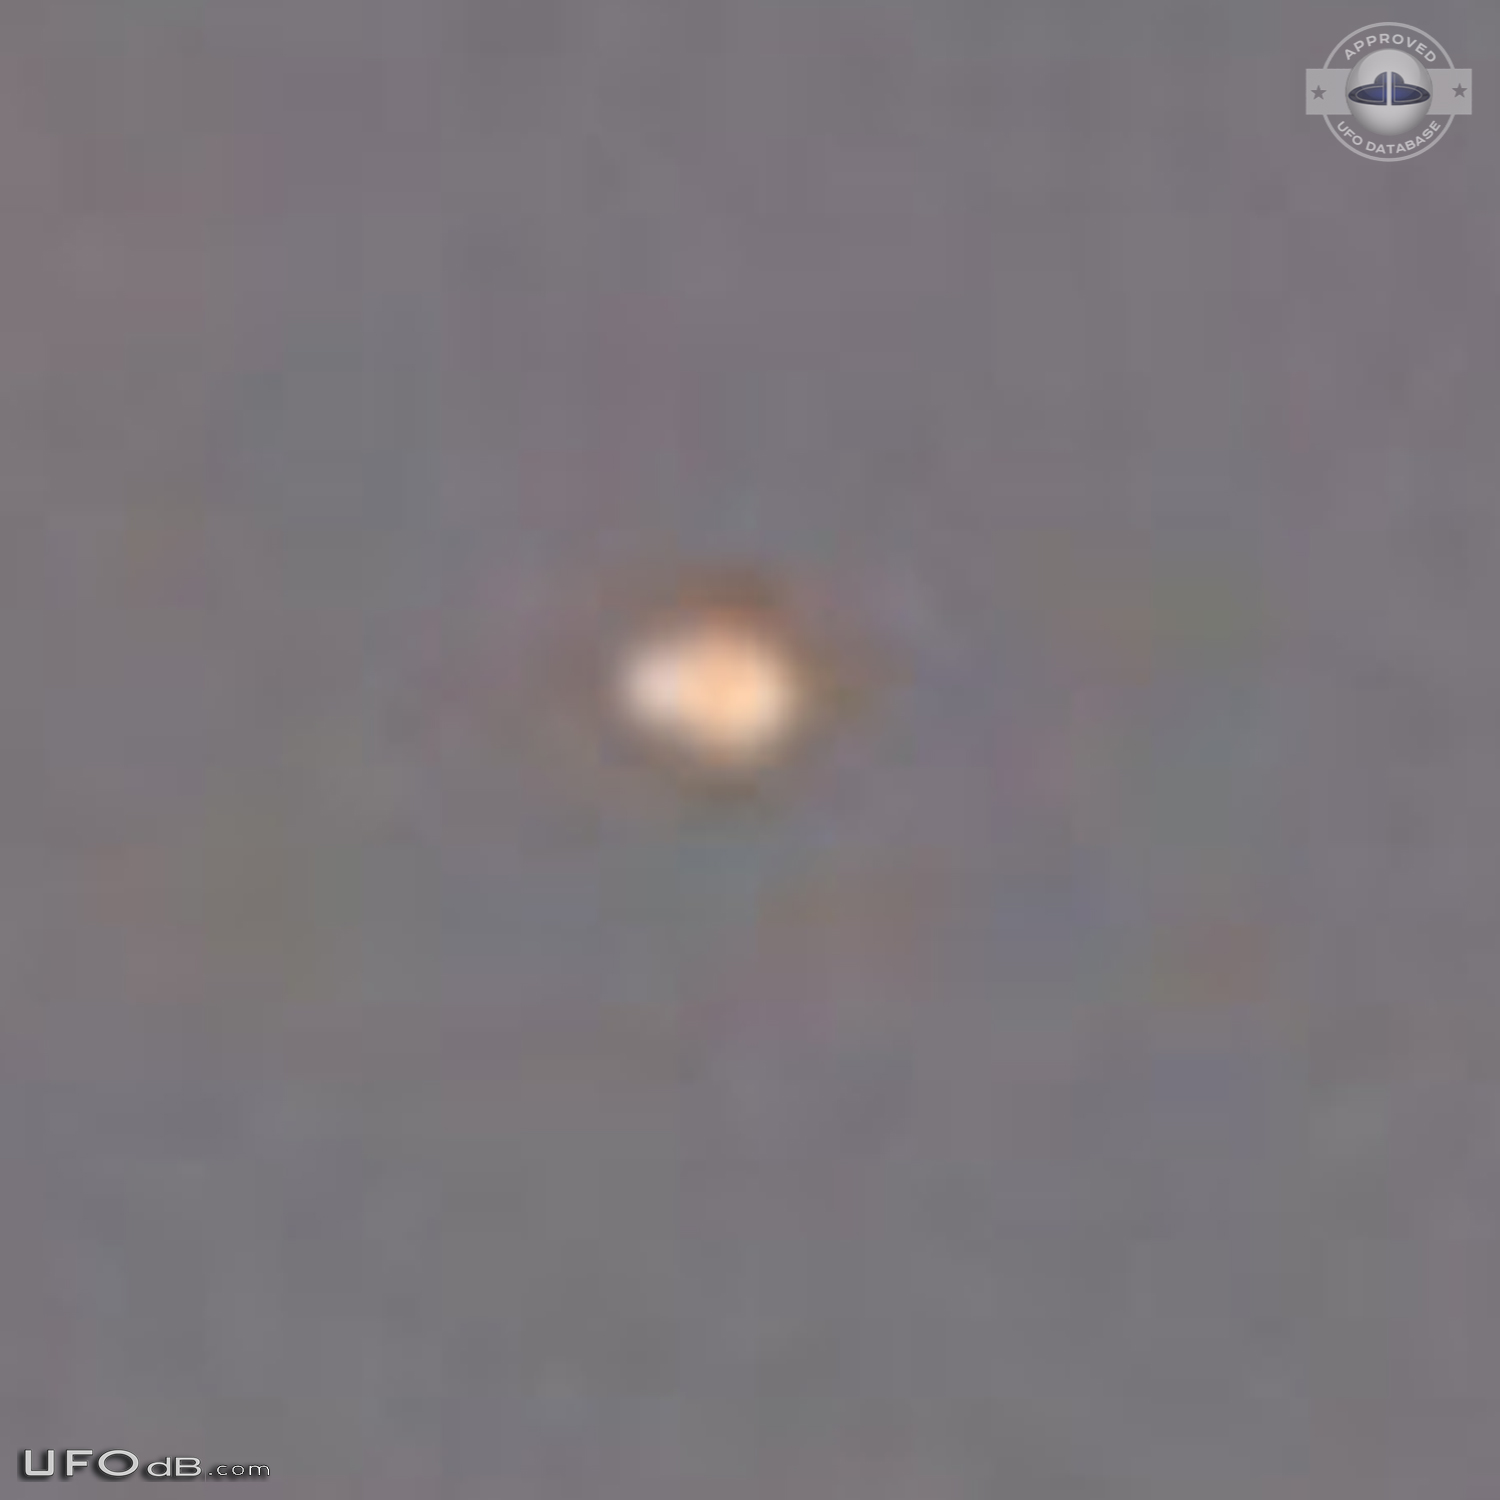 Day light large silver UFO in Fremantle Western Australia January 2015 UFO Picture #655-4